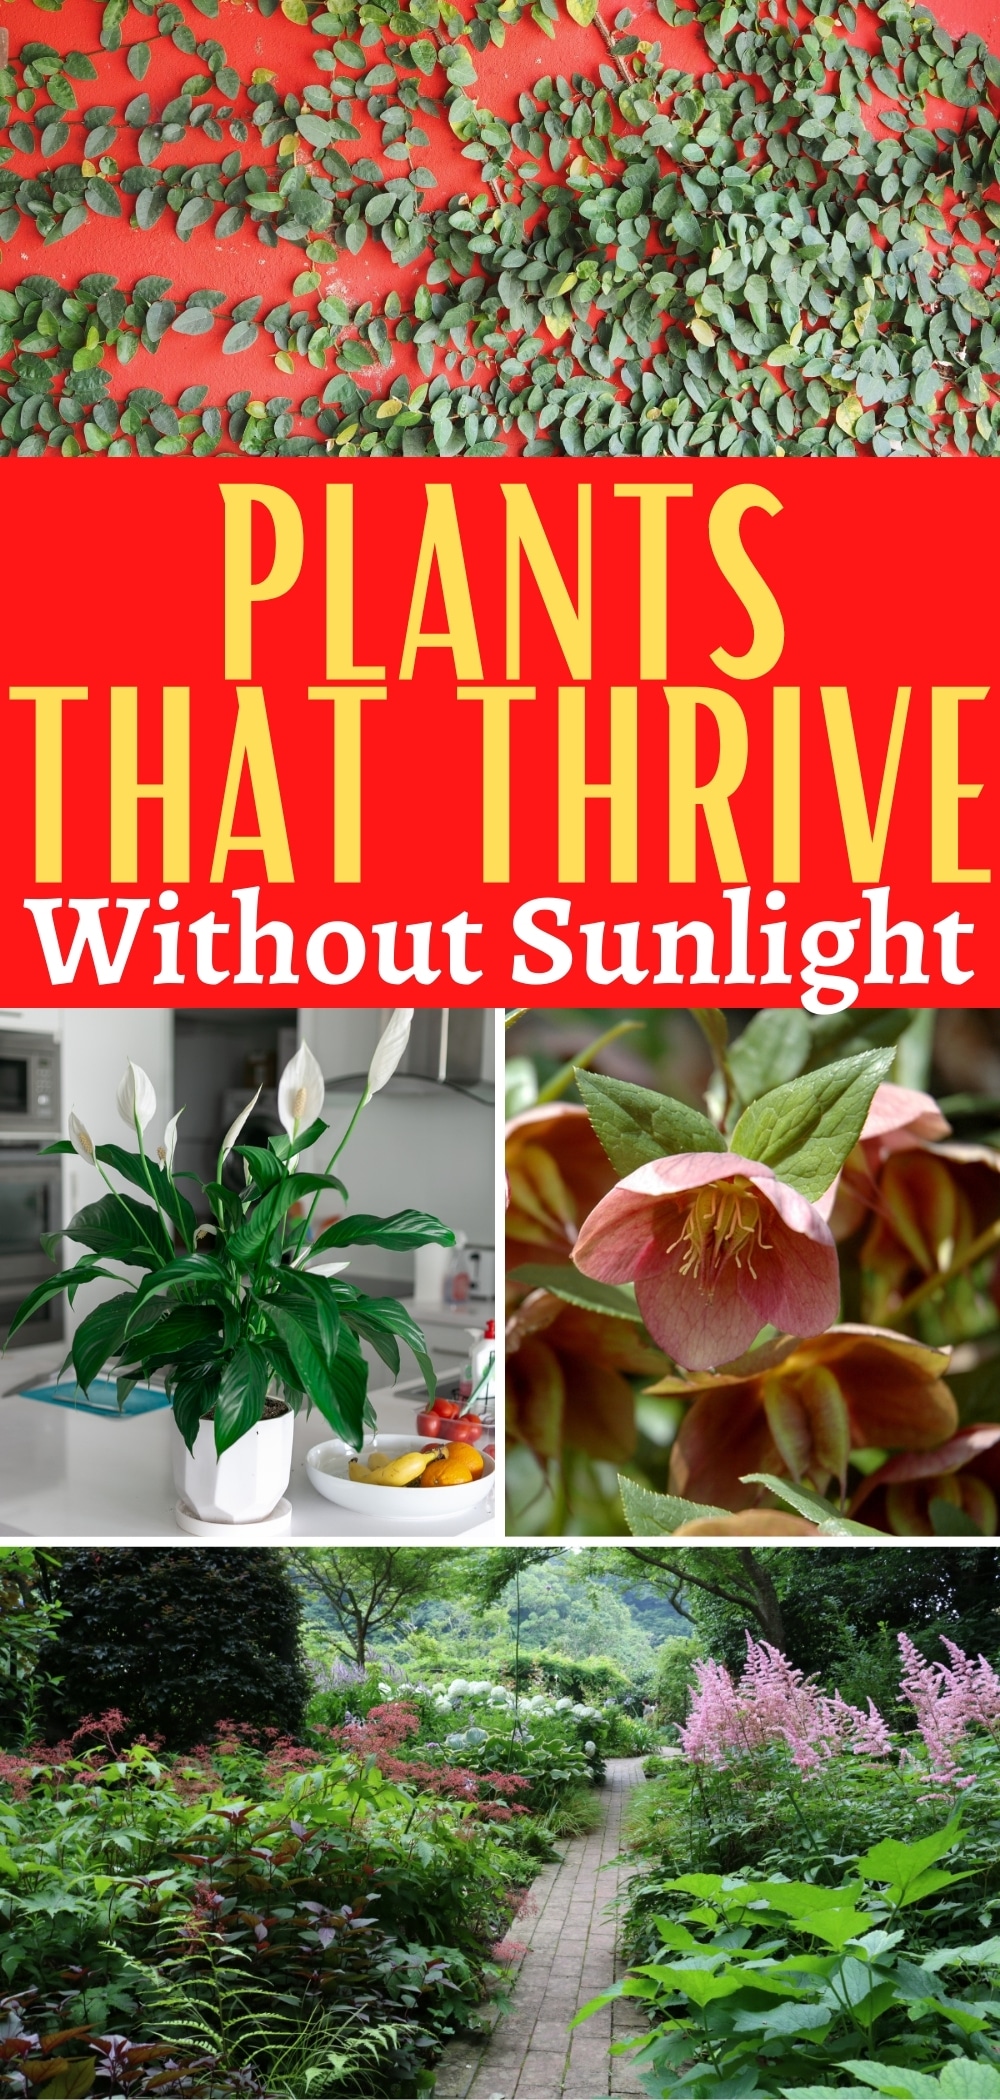 24 Air-Purifying Plants That Thrive Without Sunlight - Gardening